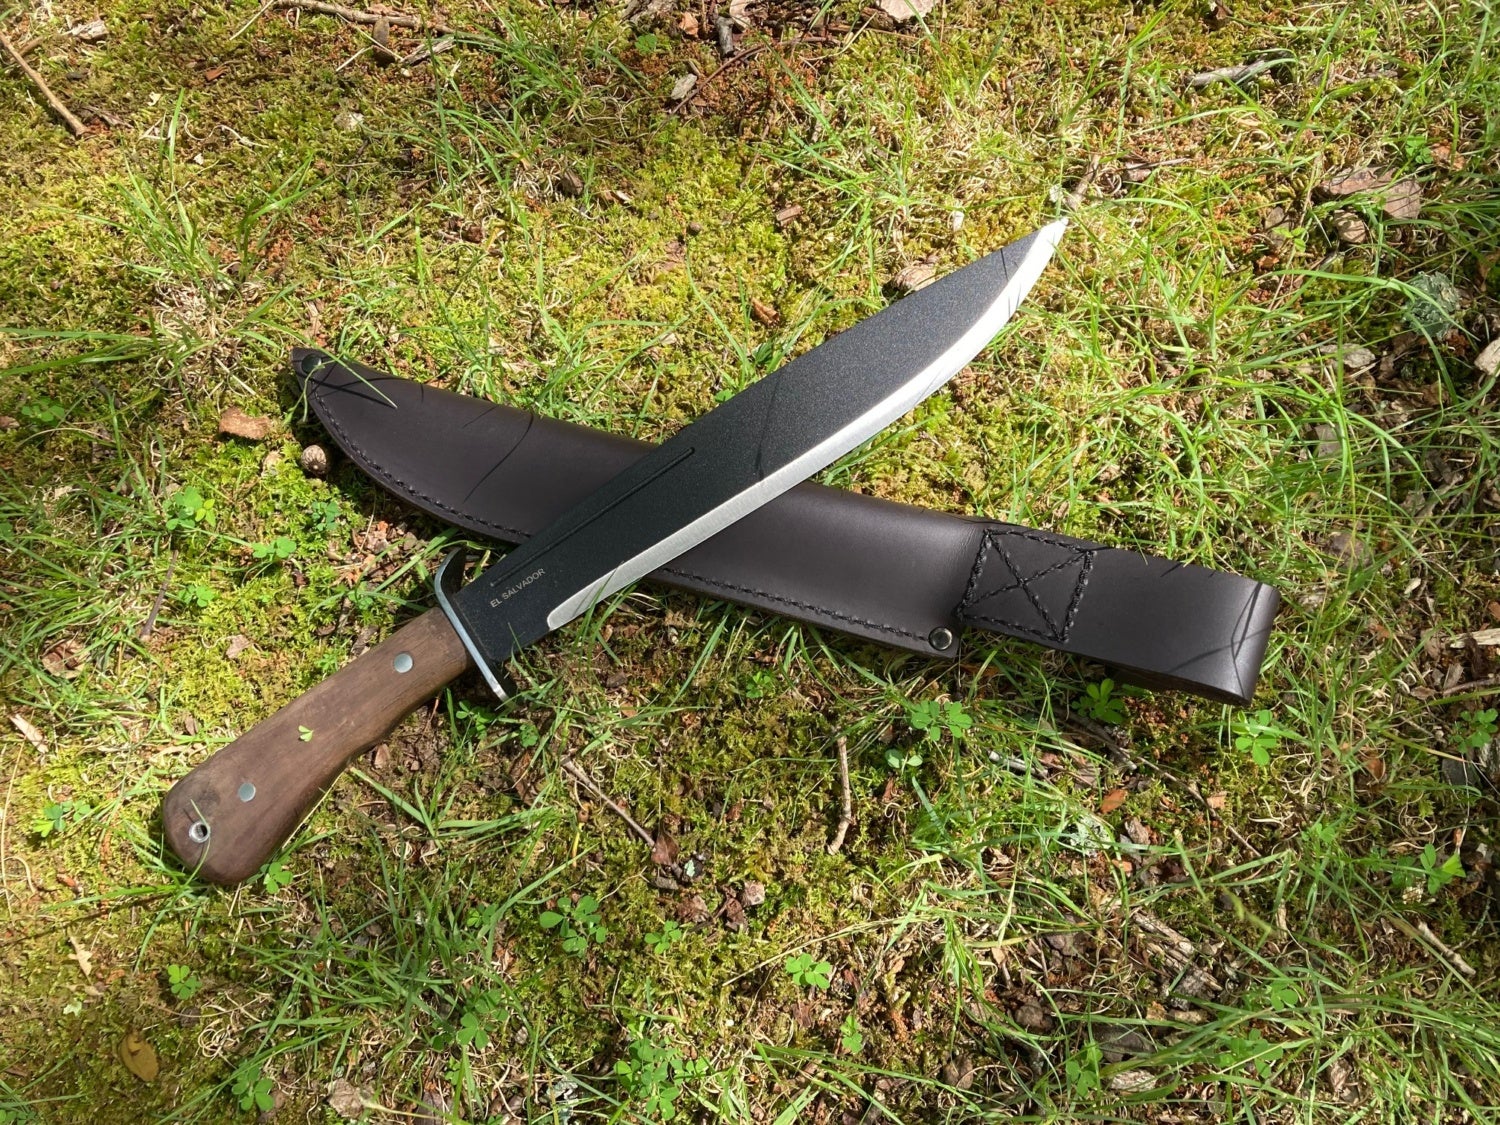 Kukrax Wildland Knives - The Straightened Kukri Is Now Available